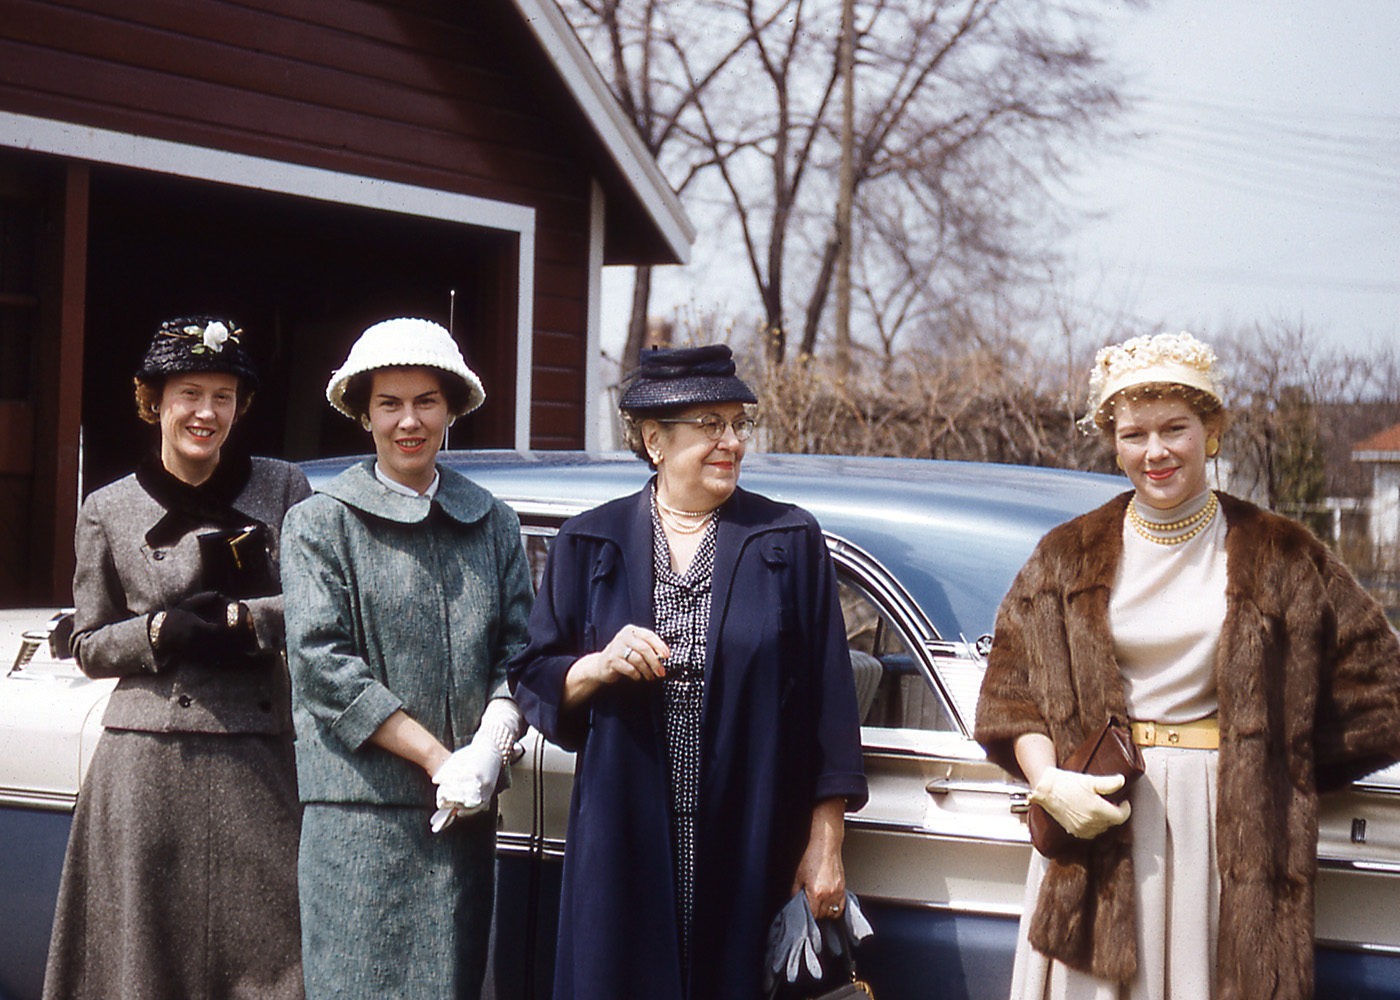 This was taken in 1958 in Windsor (then Riverside) Ontario. From left to right: my mother, Betty; Aunt Katherine; my father's mother; and Aunt Molly. One mile behind the trees is the City of Detroit. Everyone is ready for the Easter service at the Riverside United Church. My grandmother and the two Aunts were visiting from Toronto, and there was always a traditional shopping spree to Hudson's famous department store in Detroit. This Kodachrome was taken by my father, John McIntyre, with his Leica camera. He worked at Ford and I think the car is a Monarch. My father and Aunt Katherine still live in Toronto. View full size.